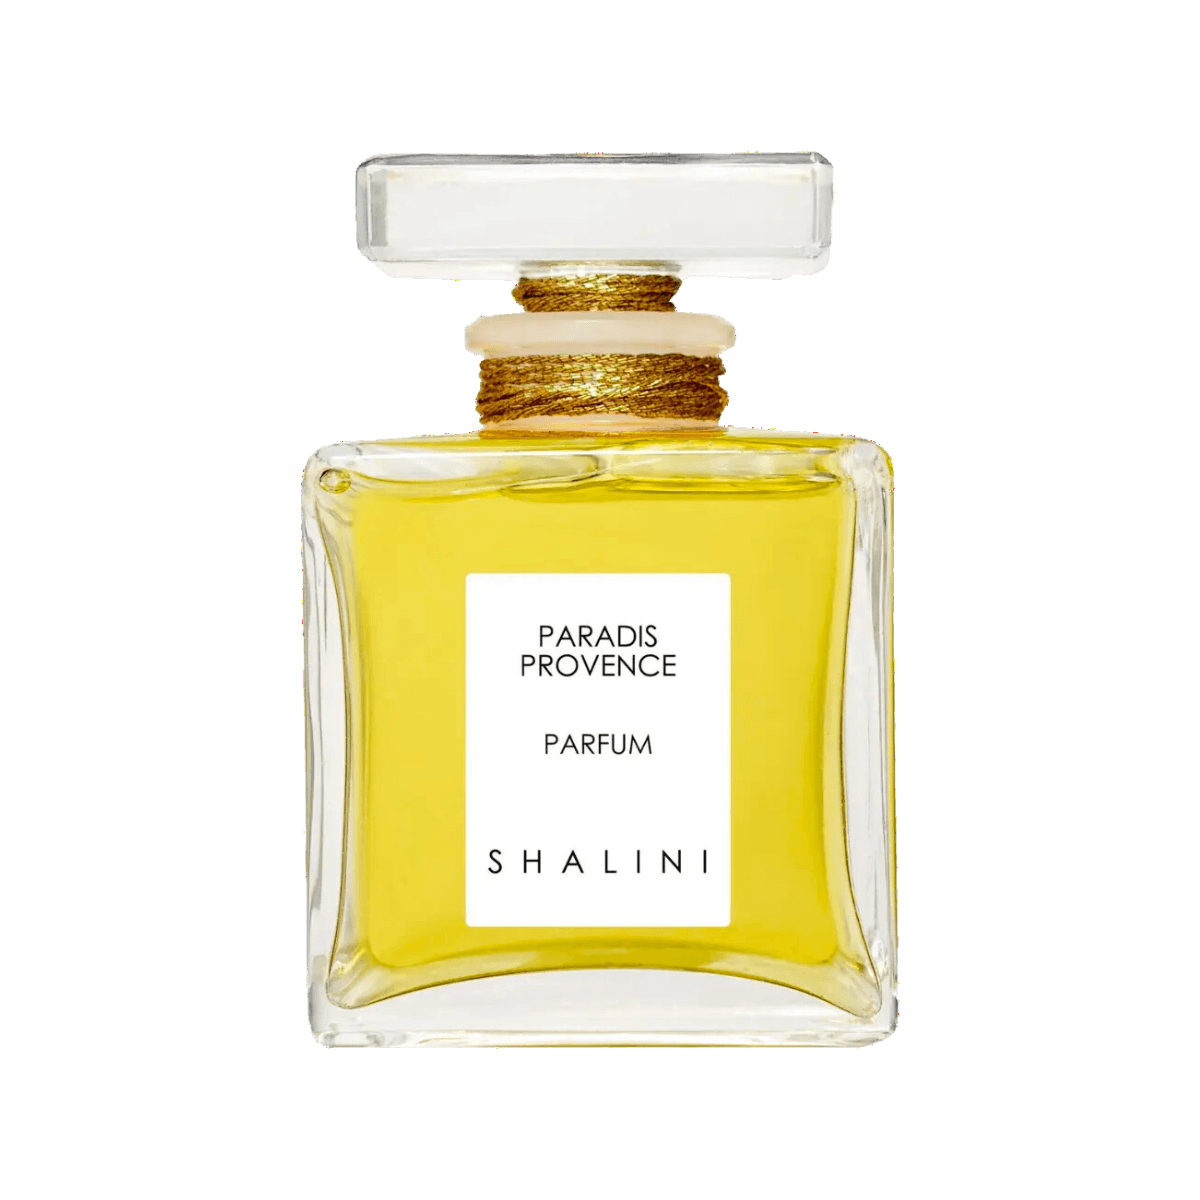 Image of Paradis Provence glass stopper by the perfume brand Shalini